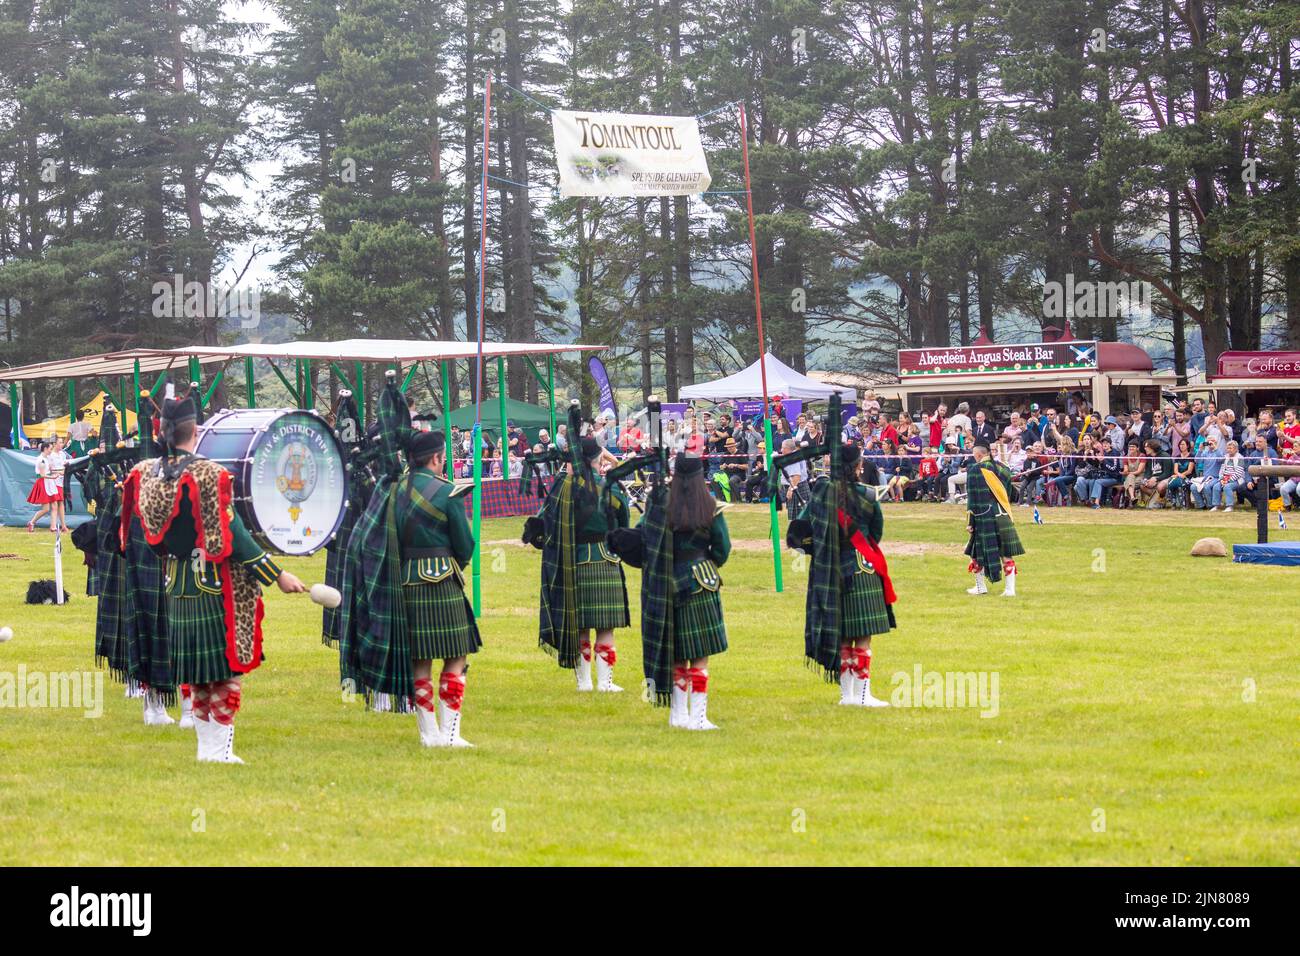 Highland games pipes band perform,Tomintoul,July 2022,Scotland,UK Stock Photo